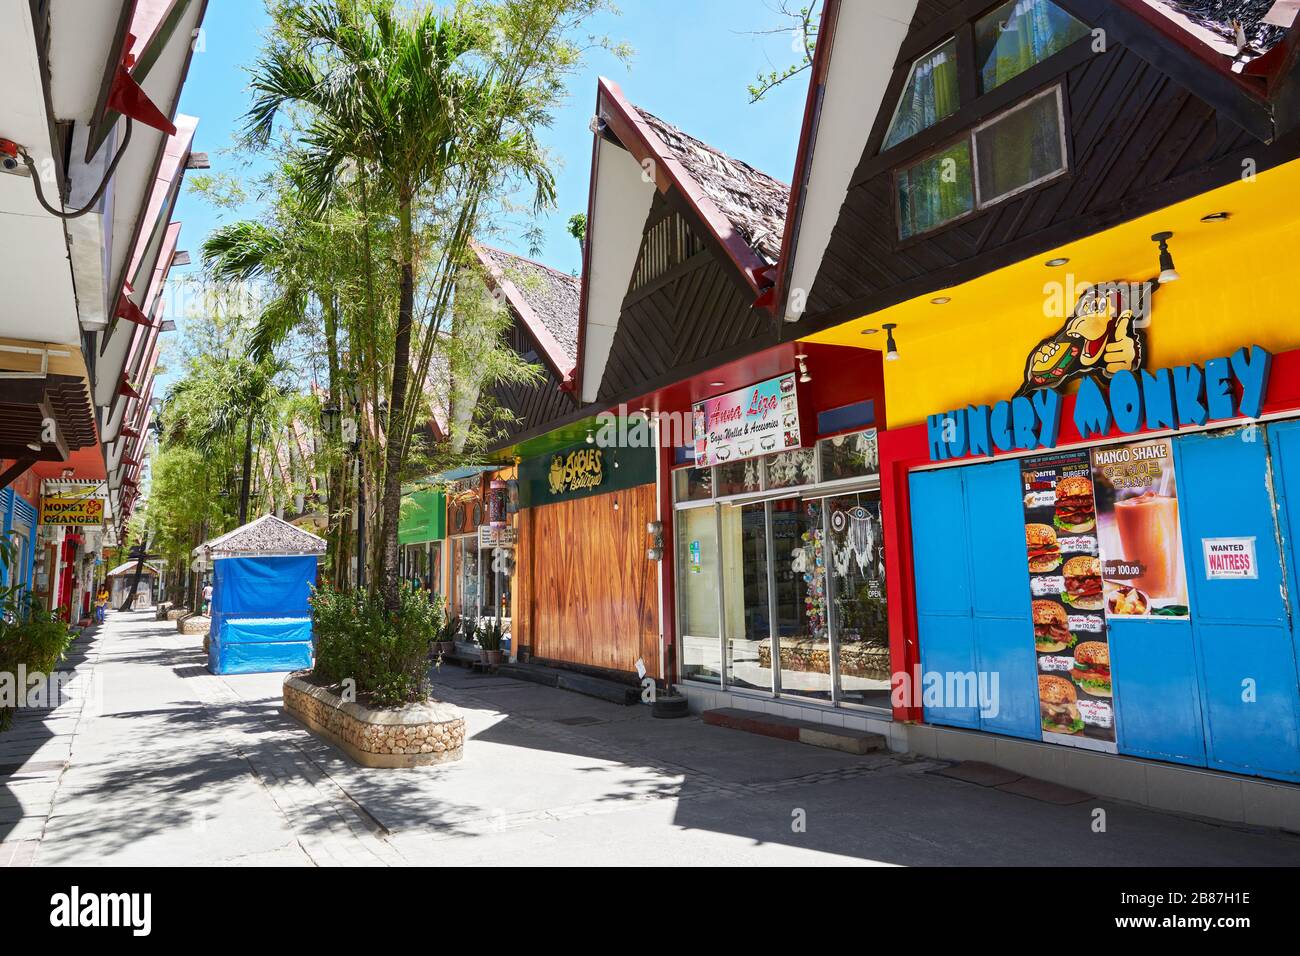 Boracay Island, Aklan, Philippines: D'Mall Market is deserted, after a total island lock-down, closed doors shutters of businesses Stock Photo